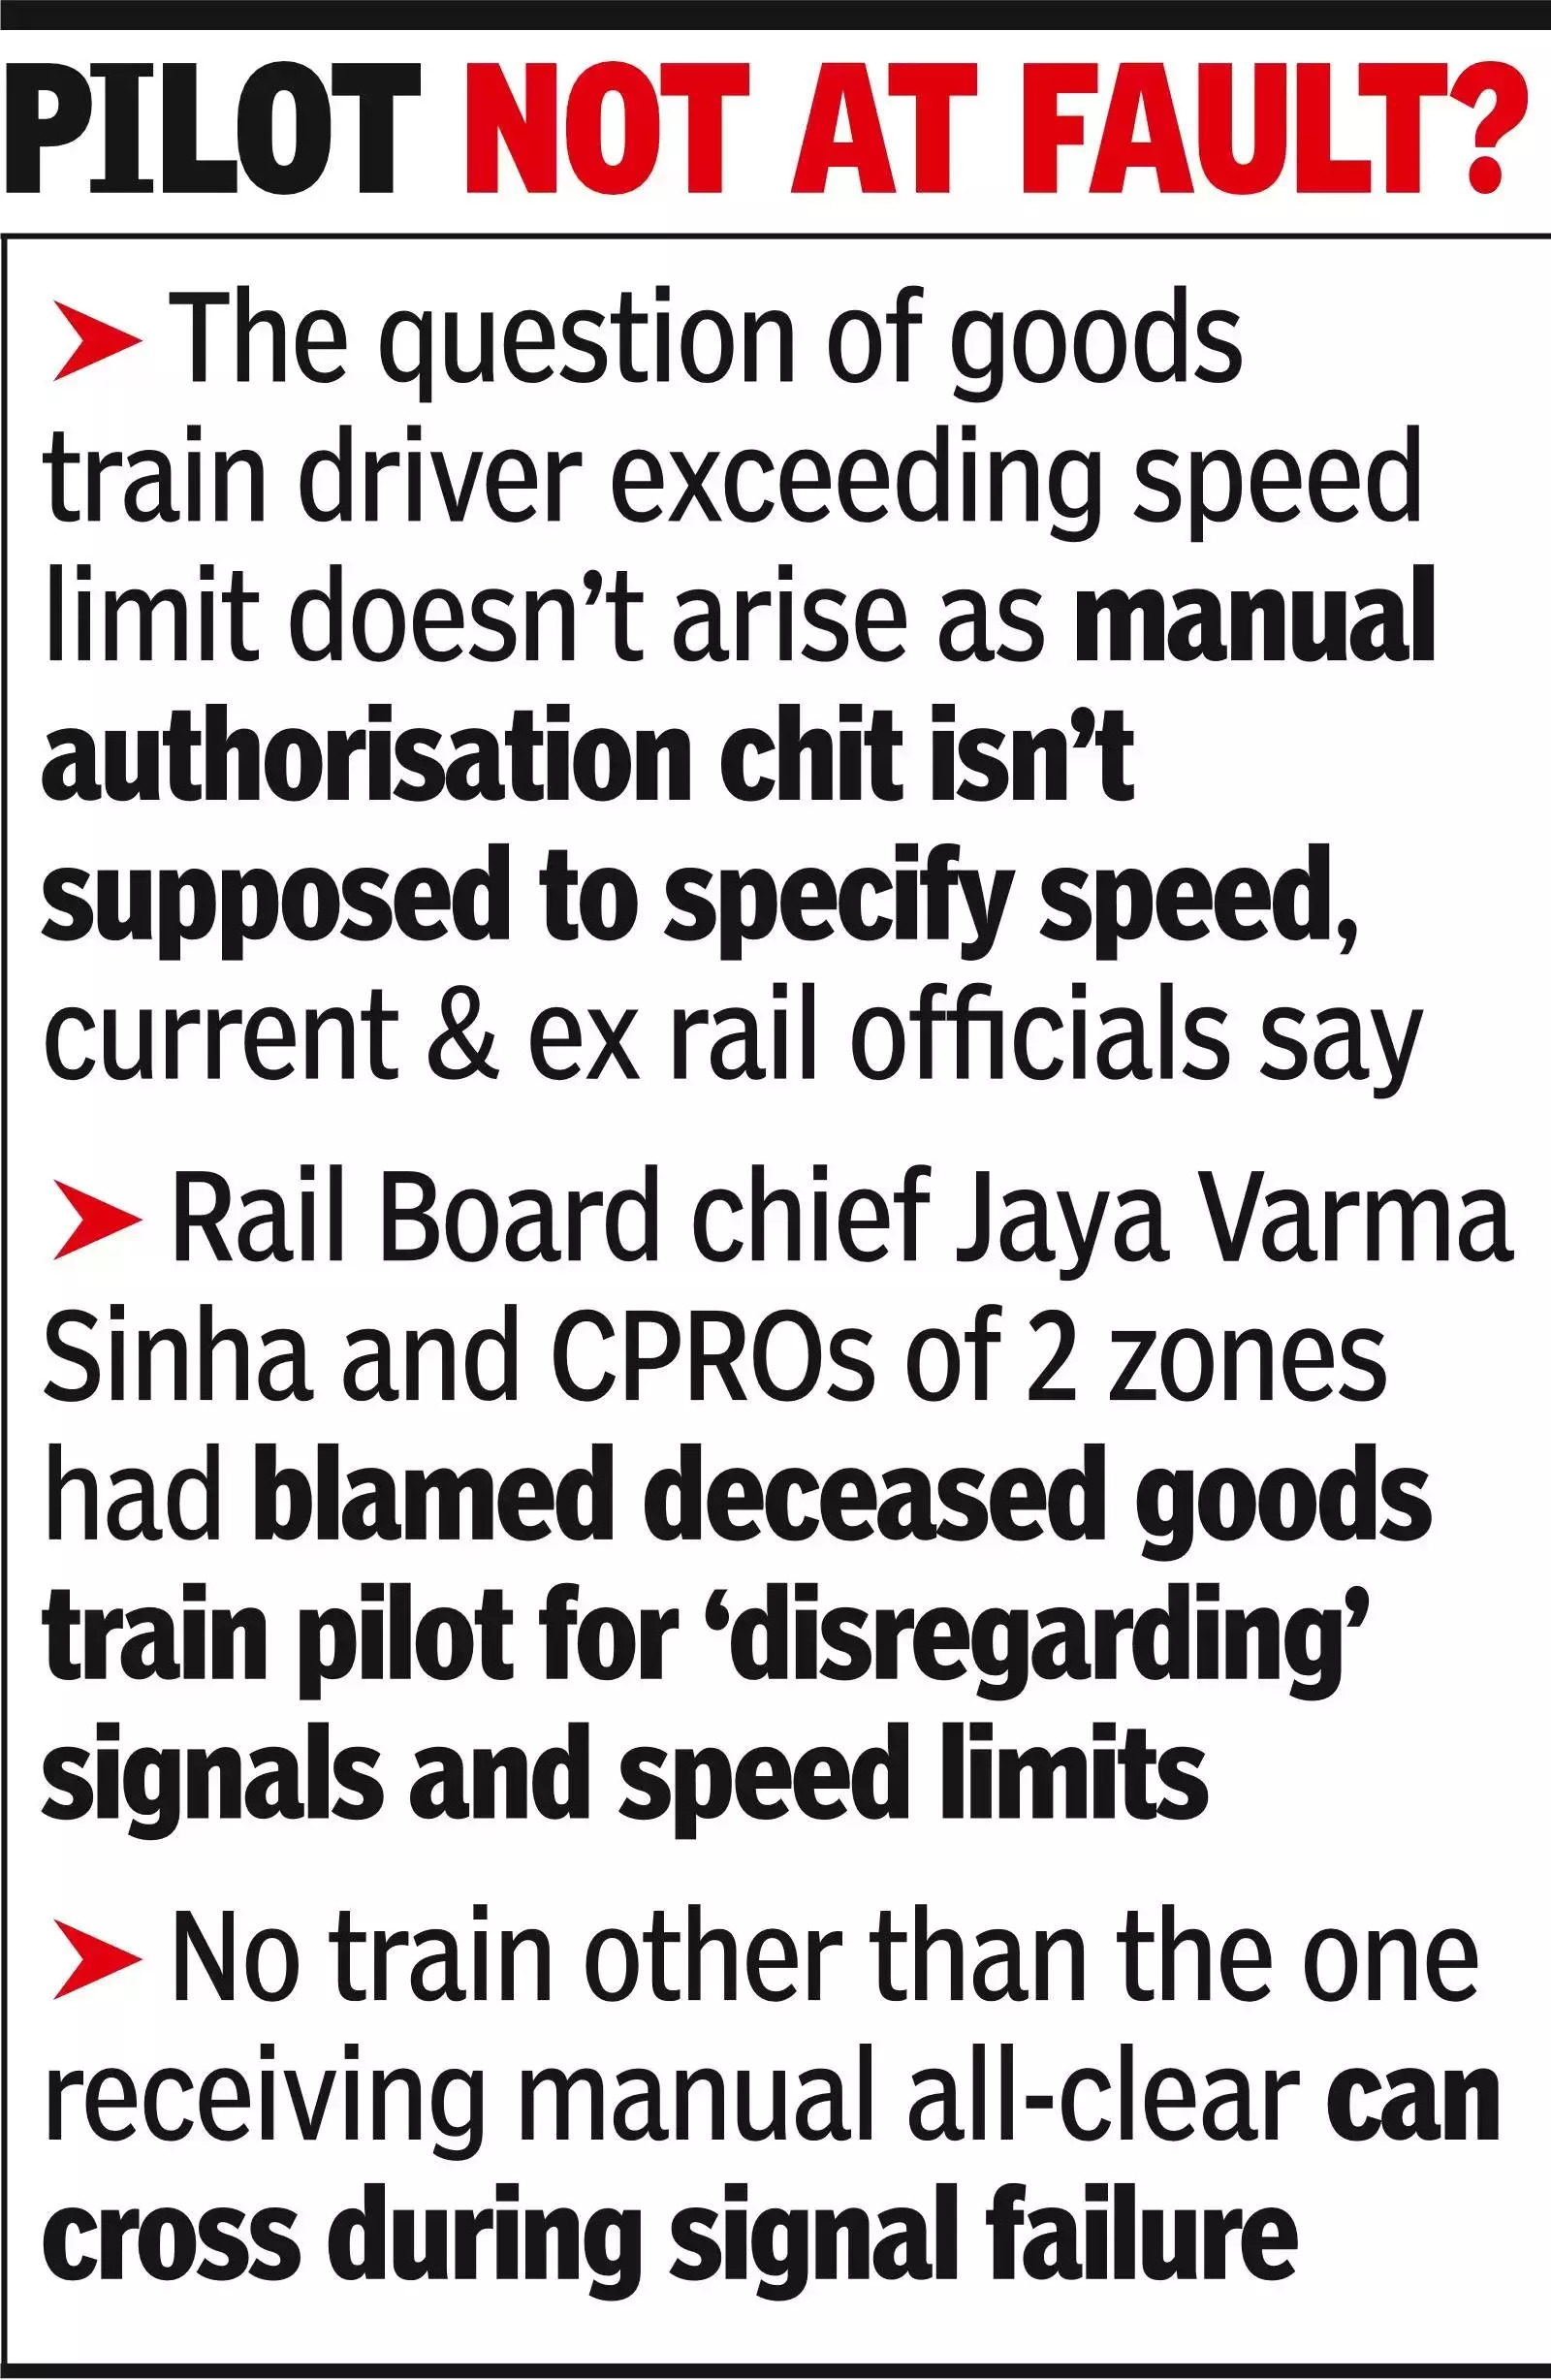 Wrong manual signalling to blame for train crash, not dead pilot_ Experts.